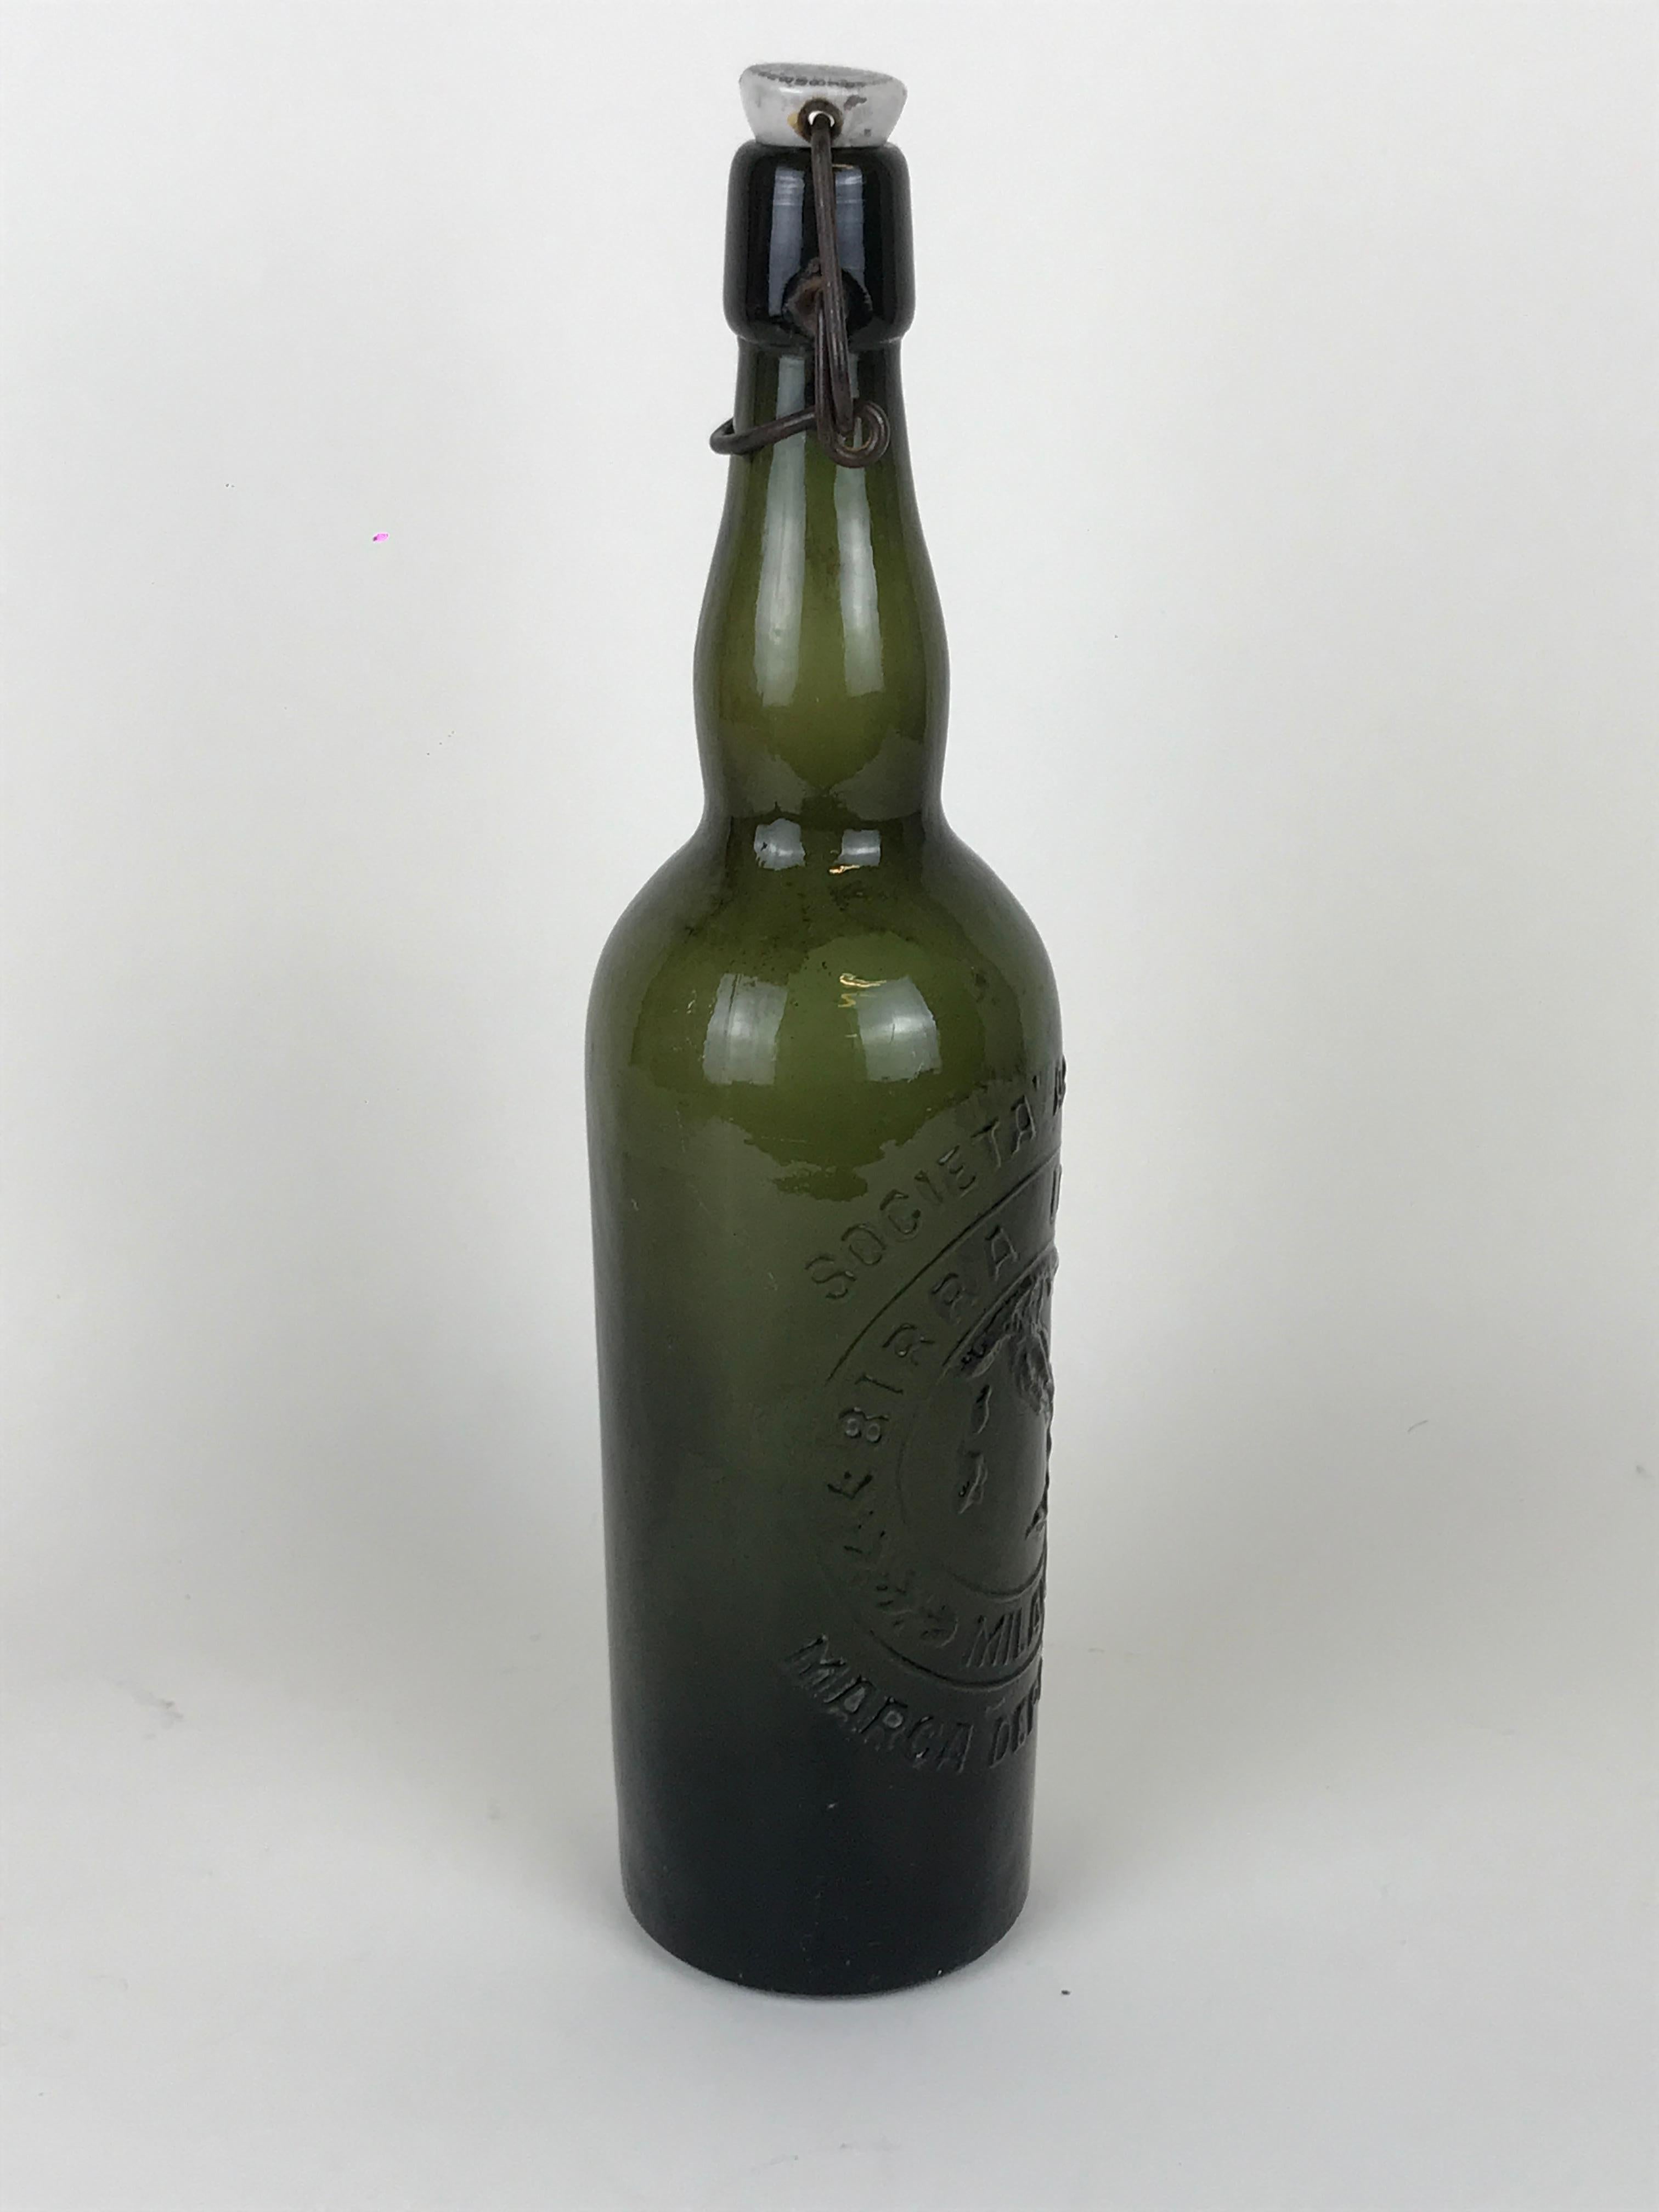 1950s Vintage Italian Birra Italia Beer Green Glass Bottle with Ceramic Stopper In Good Condition For Sale In Milan, IT